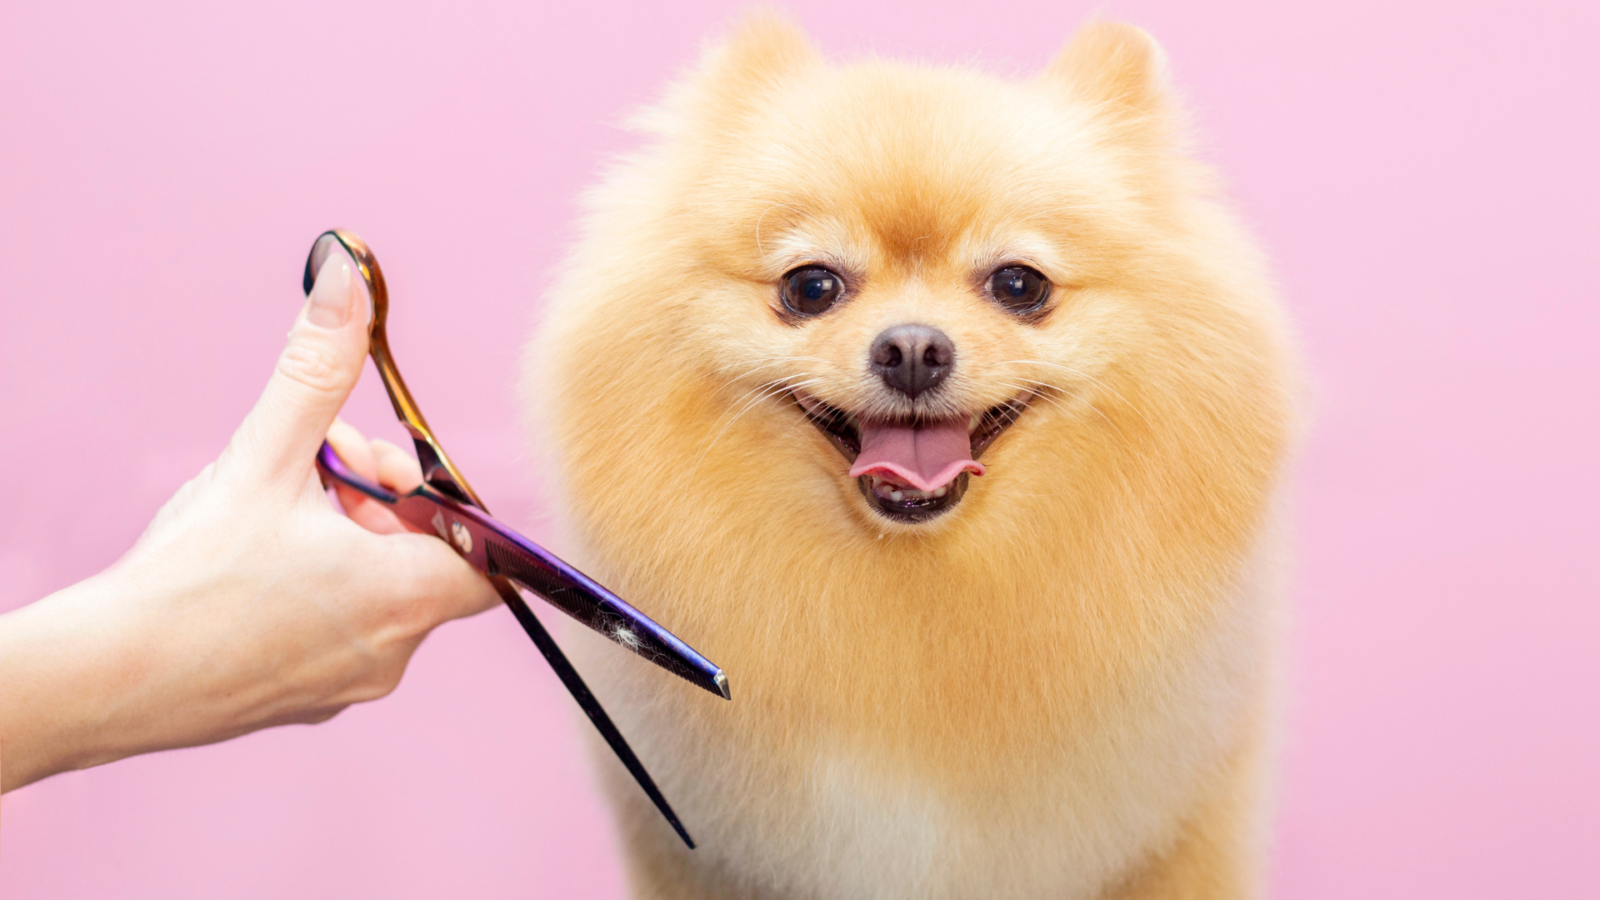 Top 10 Benefits Of Dog Grooming - Very Important Paws